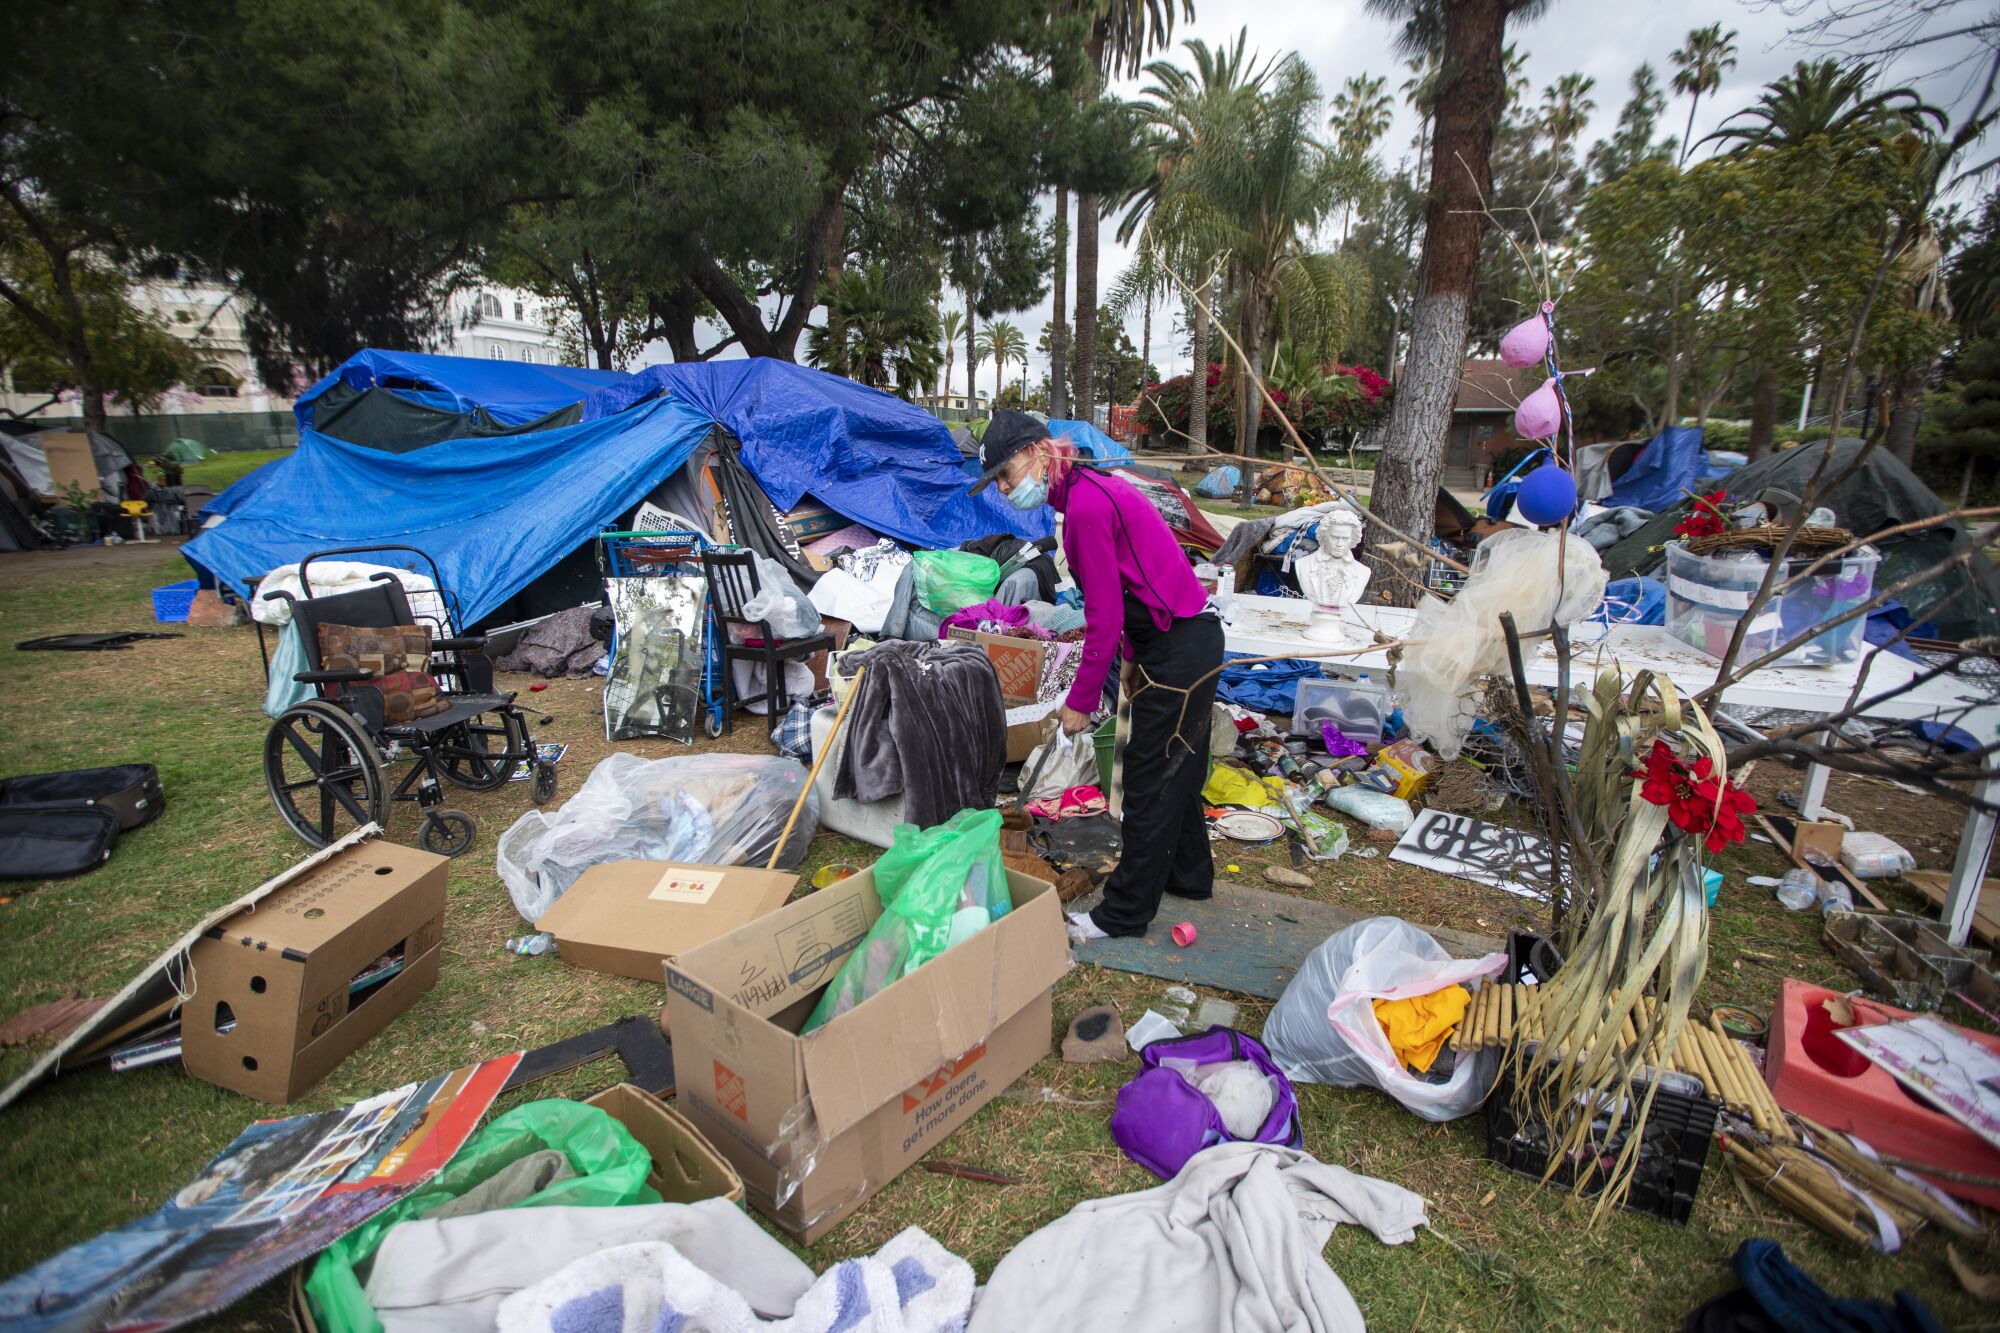 March 2021 photo of Valerie Zeller trying to organize her belongings from a homeless encampment in Echo Park Lake.